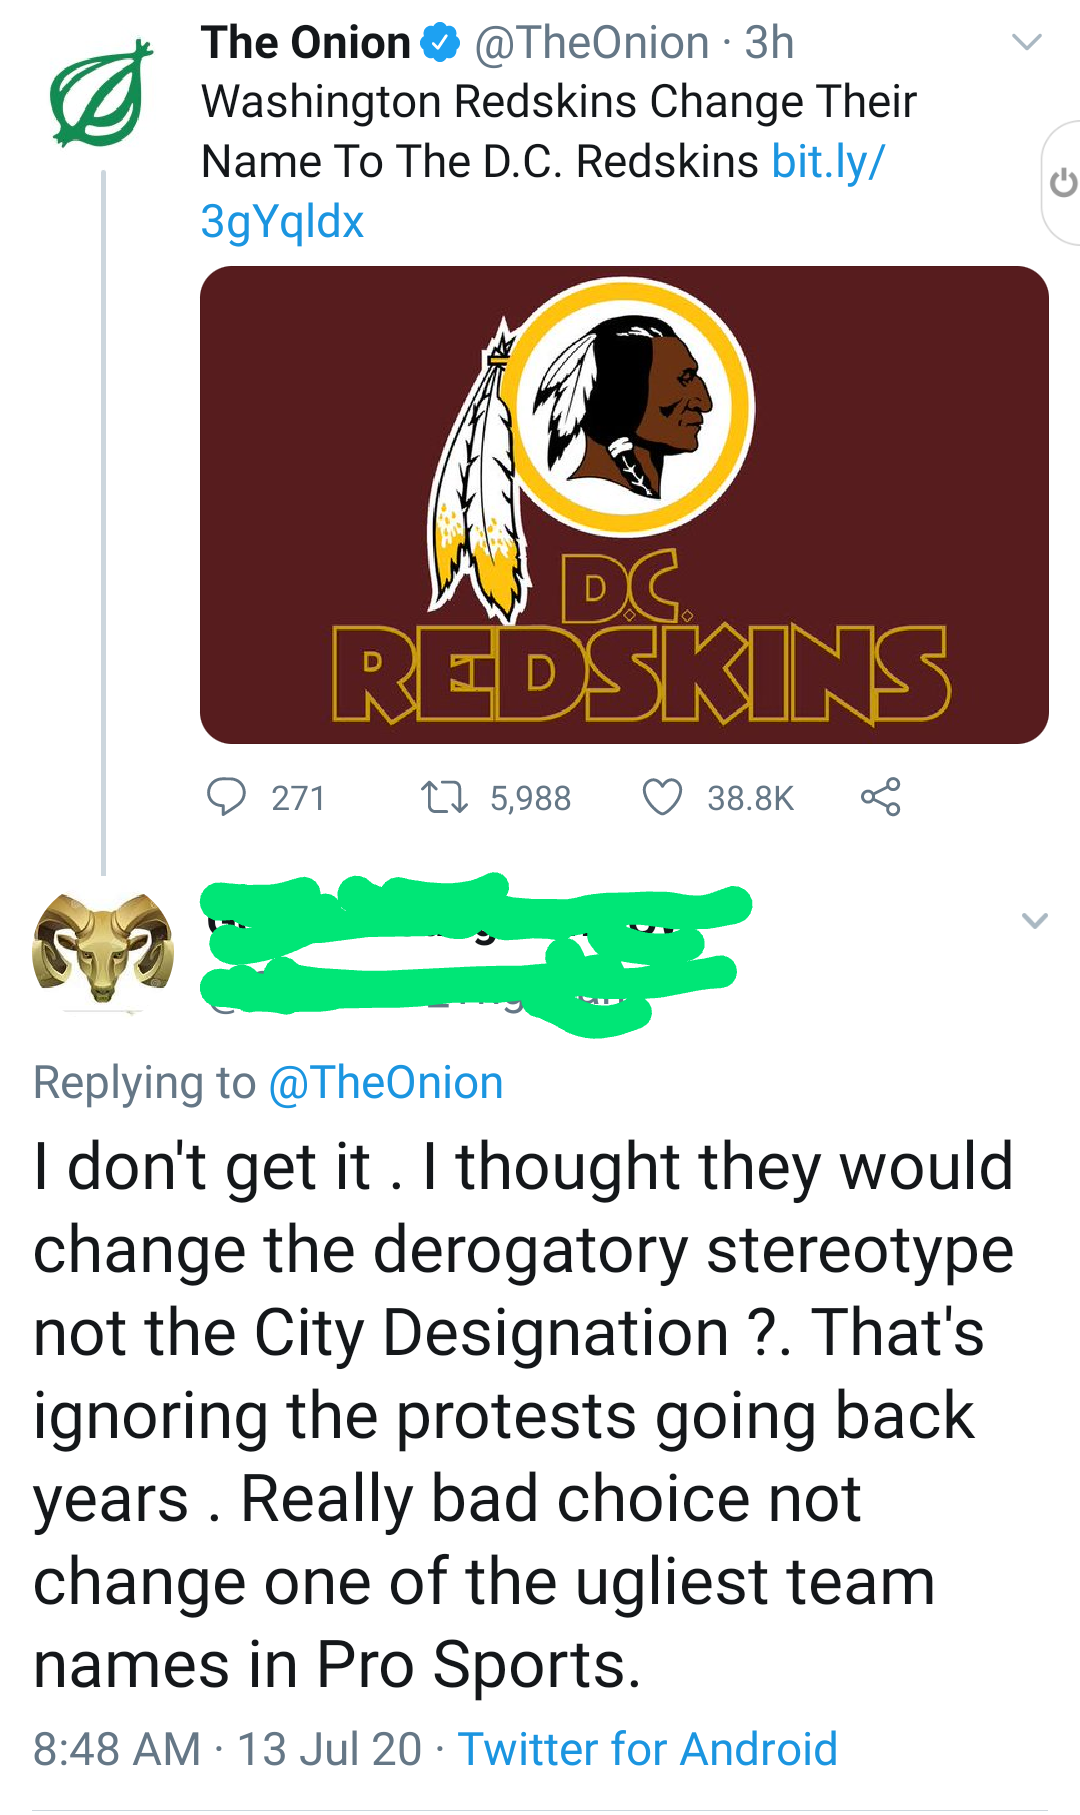 The Onion Washington Redskins Change Their Name To The D.C. Redskins - I don't get it. I thought they would change the derogatory stereotype not the City Designation ?. That's ignoring the protests going back years. Really bad choice not change one of the